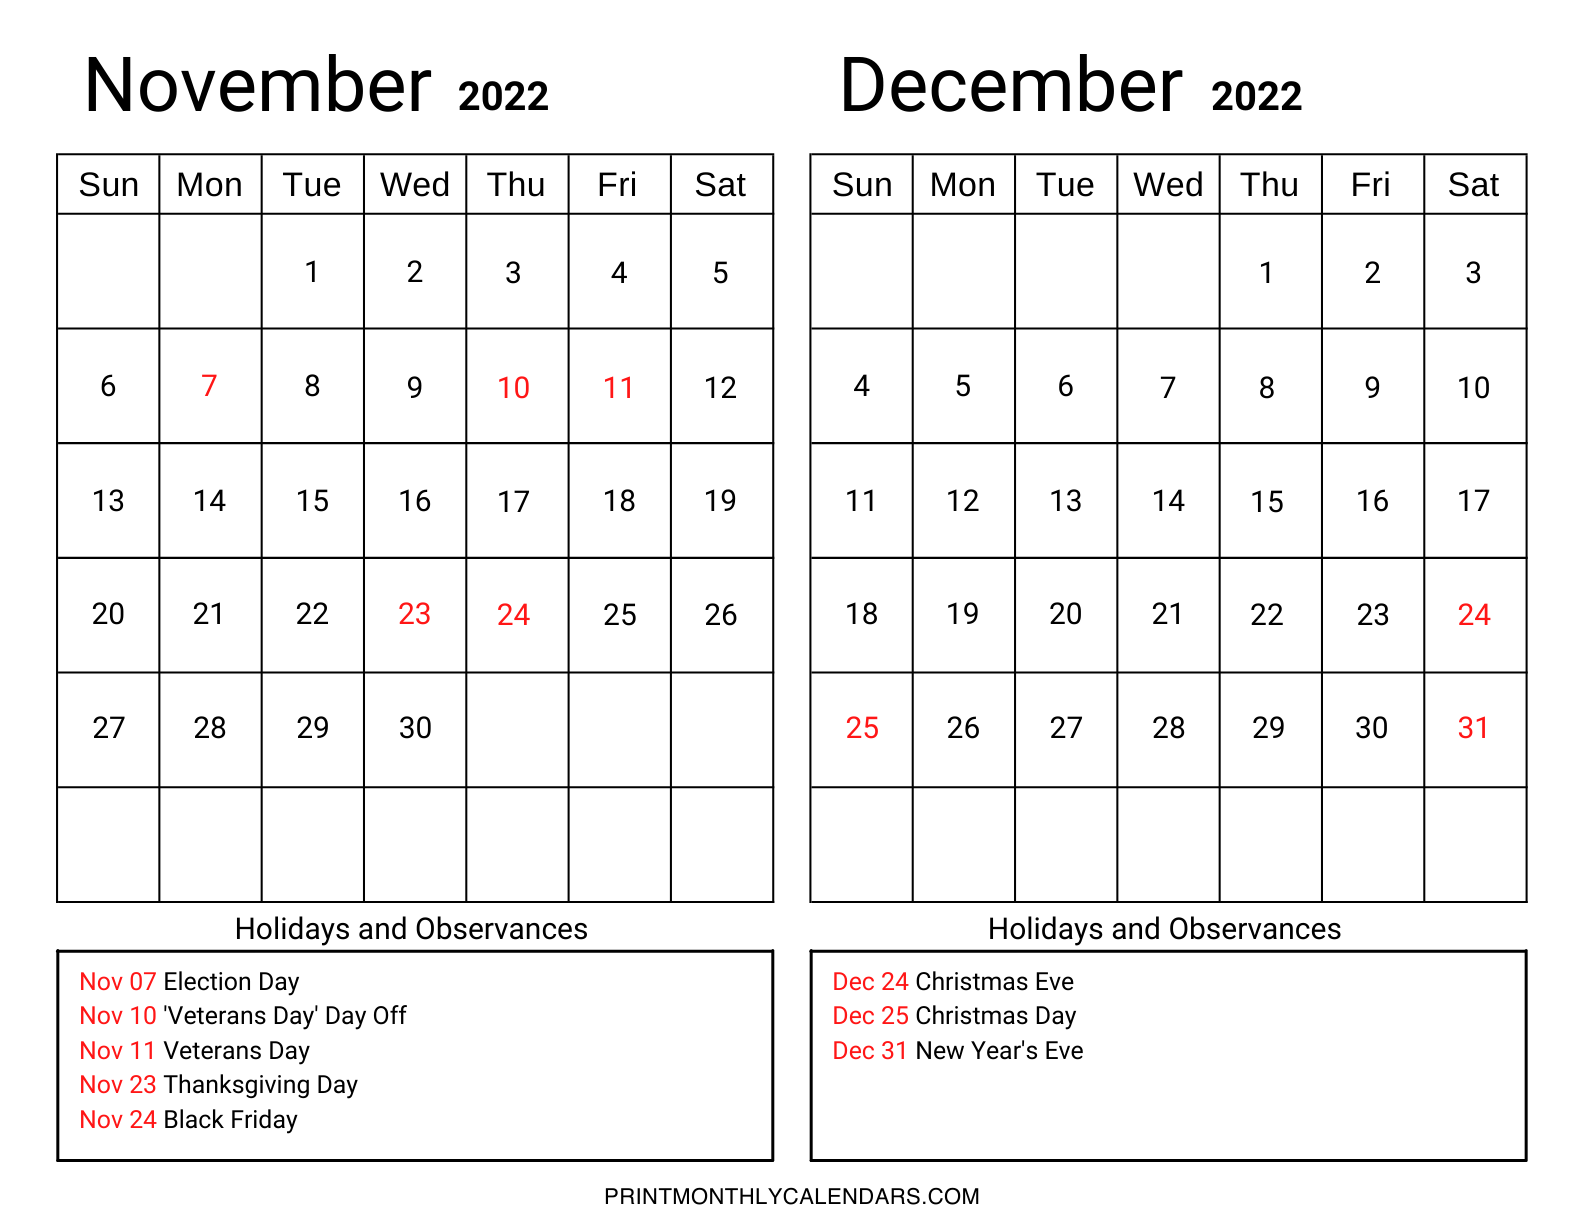 November December 2022 calendar template with United States holidays and observances list at the bottom of the grid. Both months are arranged in landscape layout on one page.